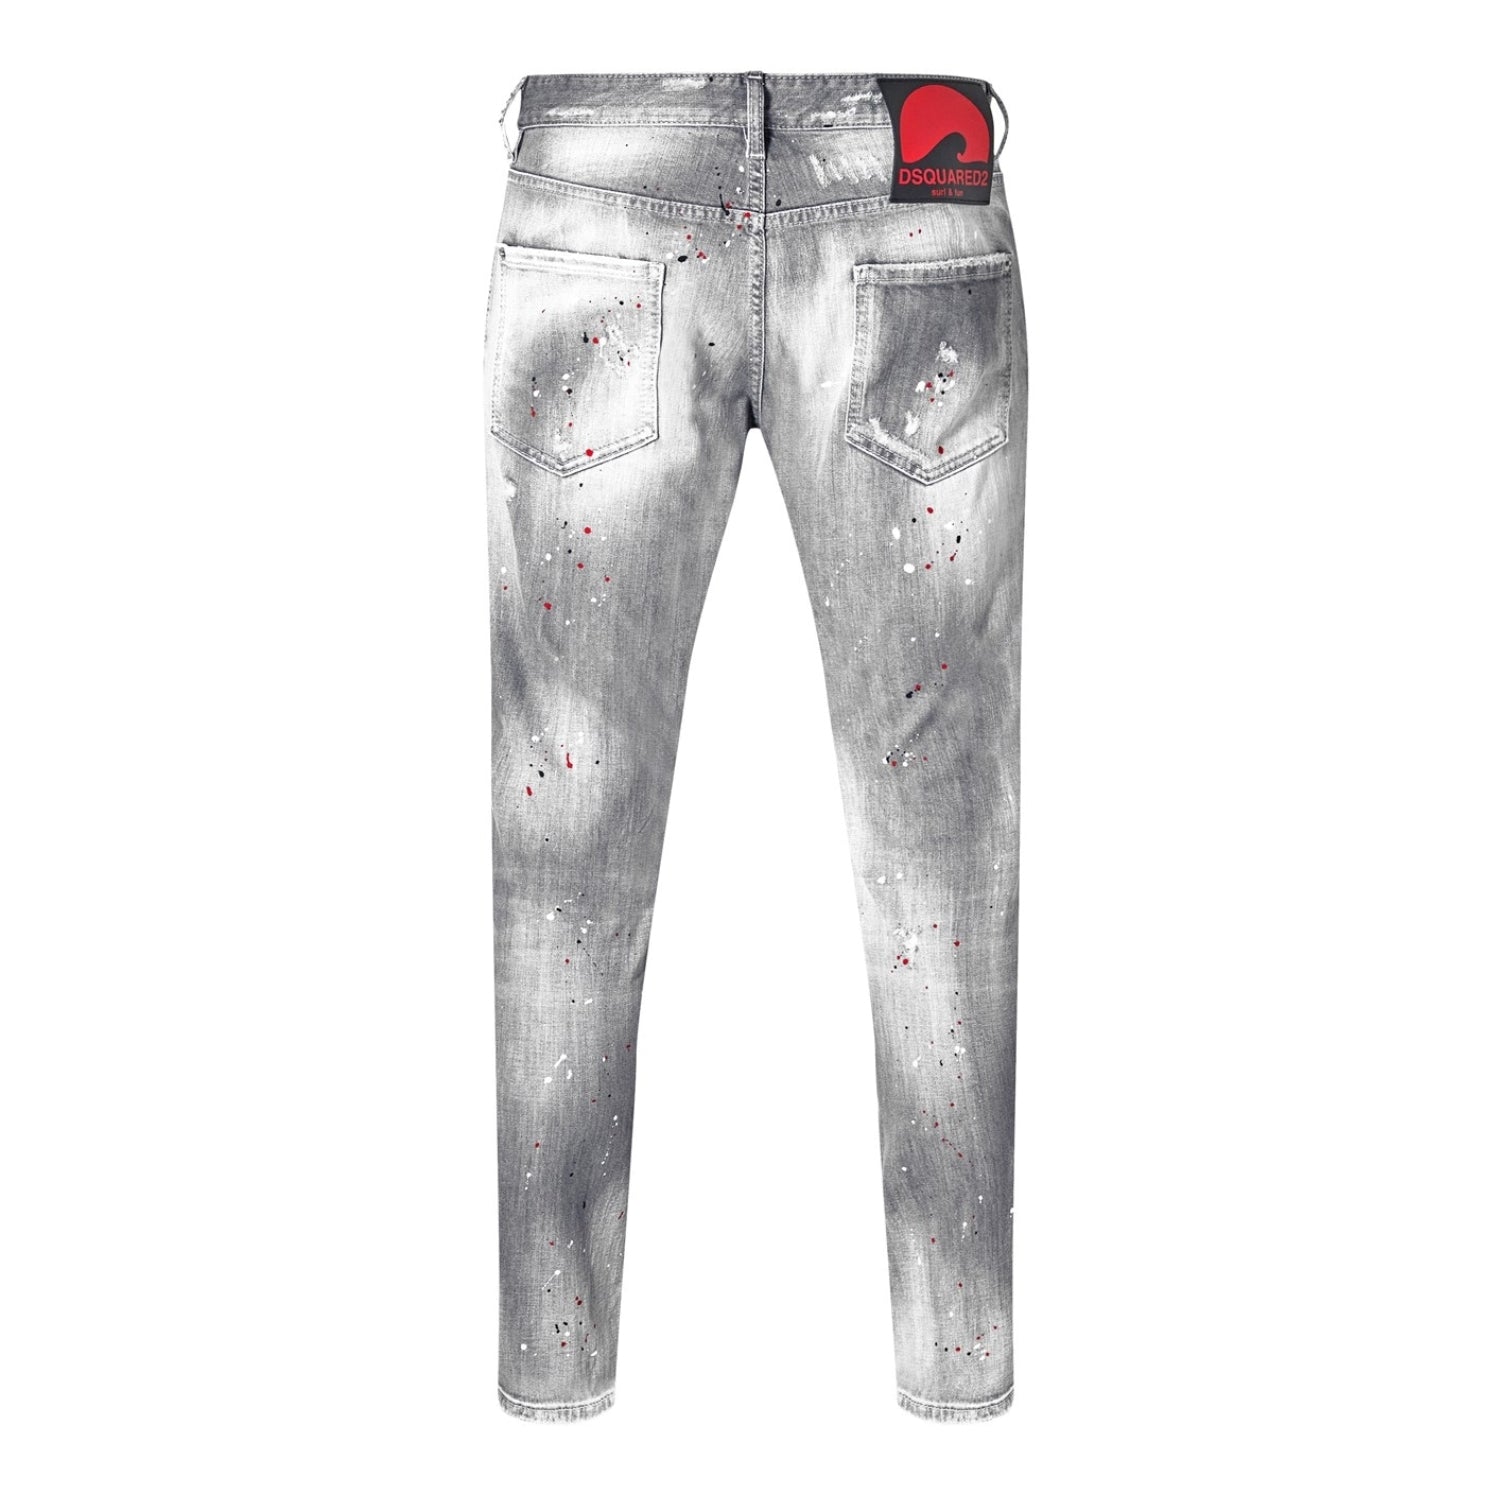 LUXURY HUB DSQUARED2 SURF&FUN COOL GUY JEANS